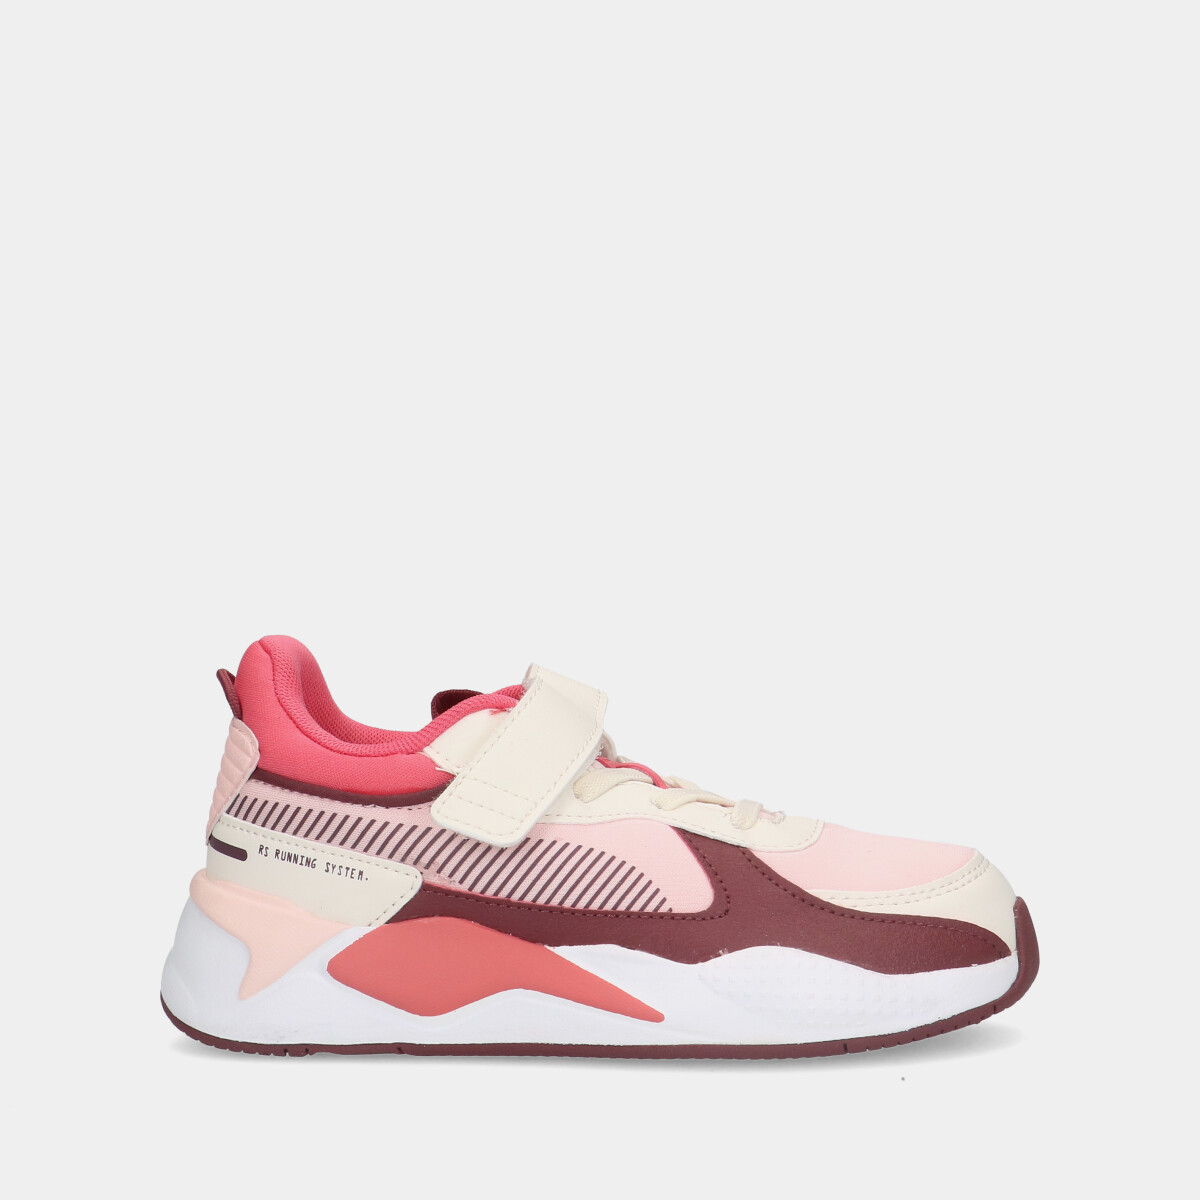 Puma RS-X Dreamy AC lightpink peuter sneakers